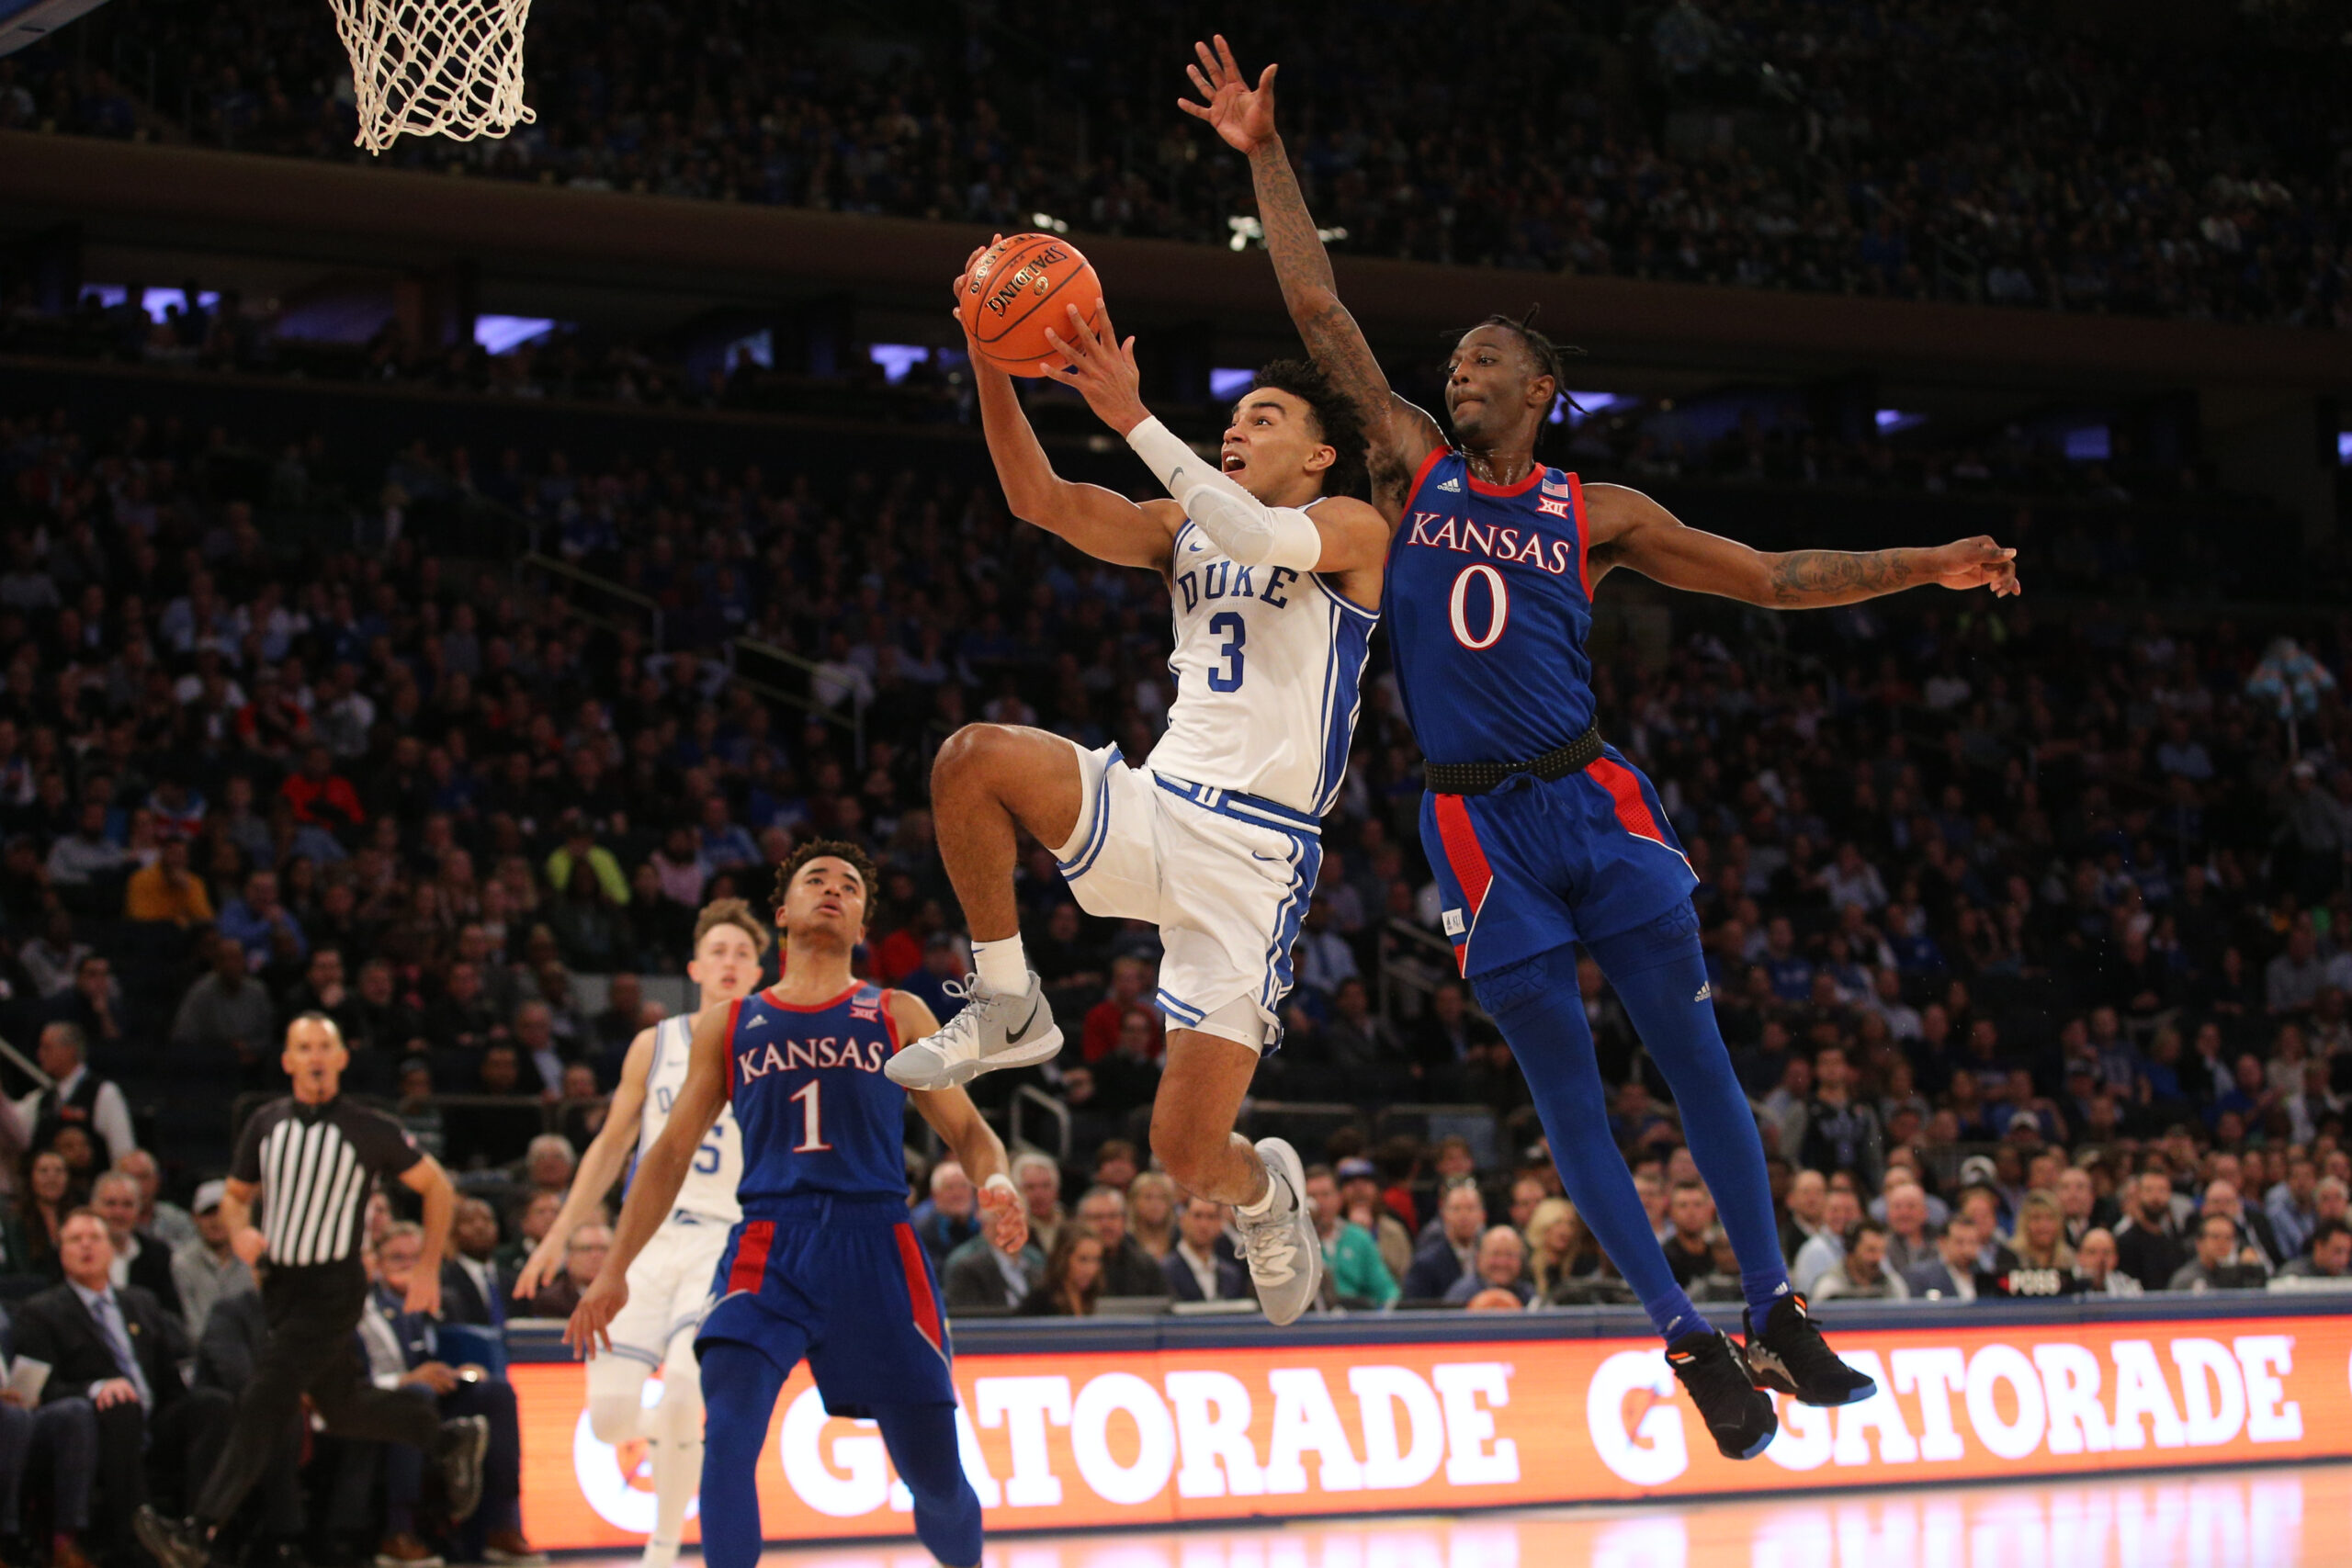 Champions Classic: Duke vs. Kansas, live stream, TV channel, time, odds, how to watch college basketball